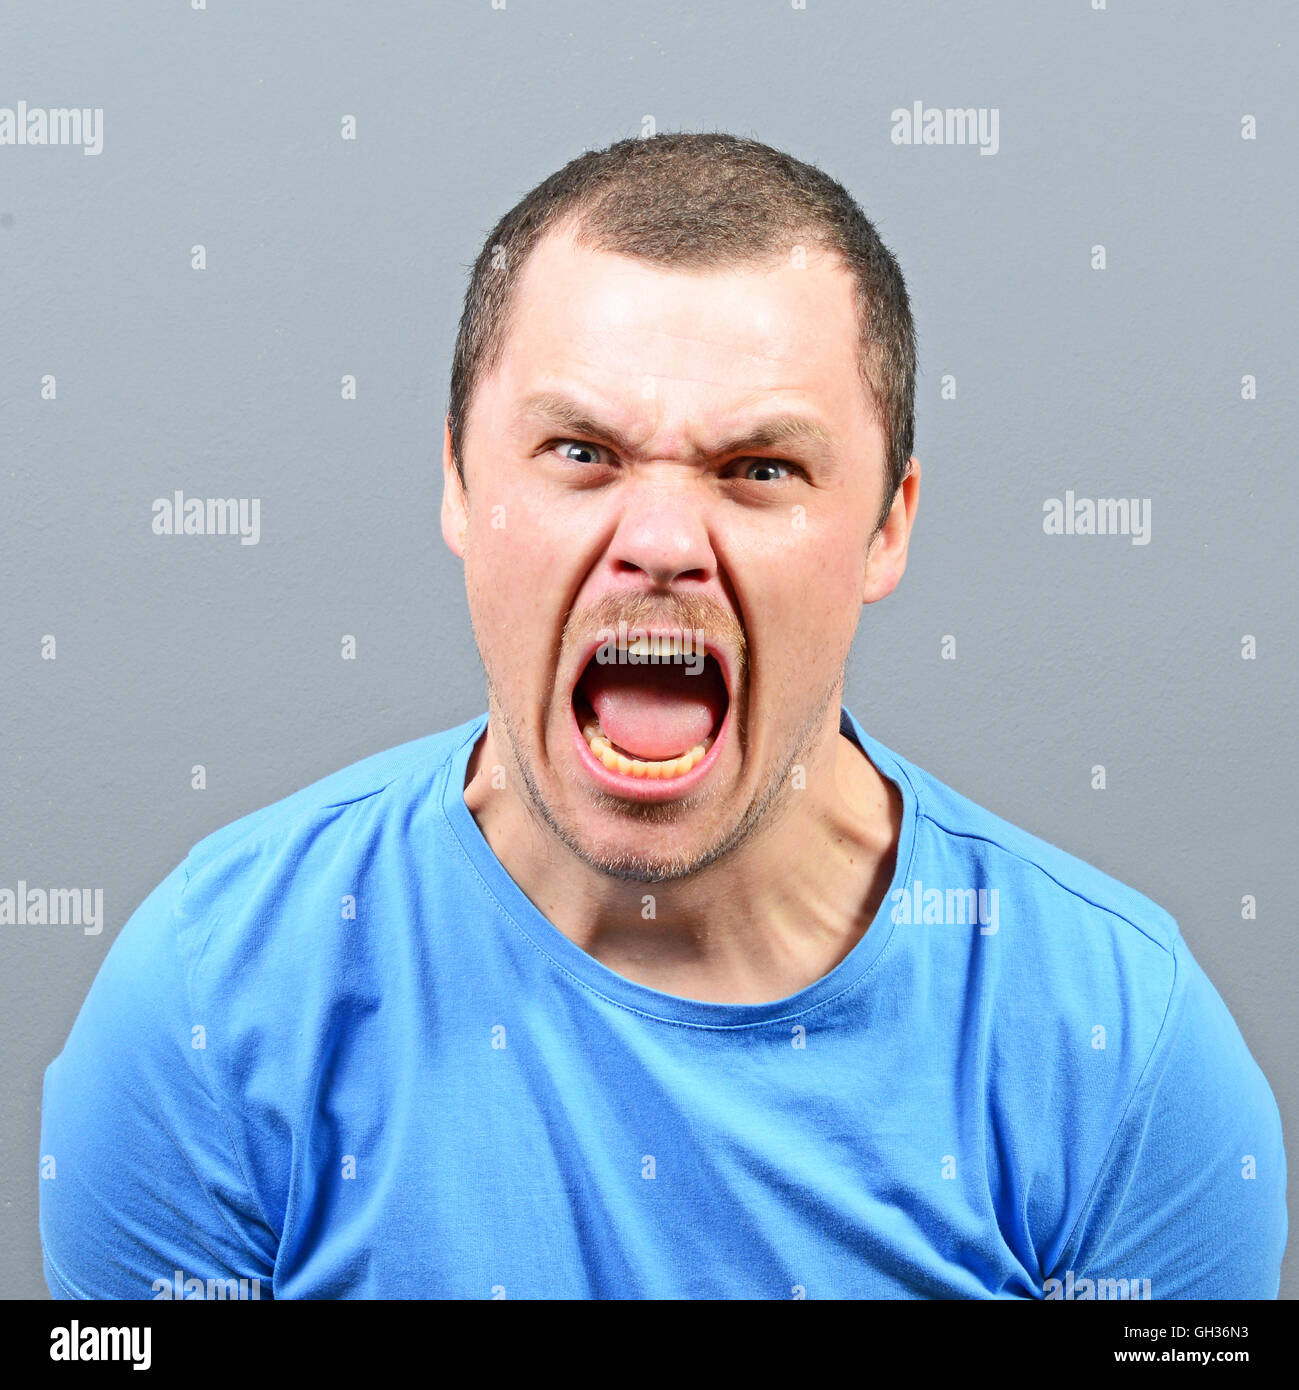 angry screaming face